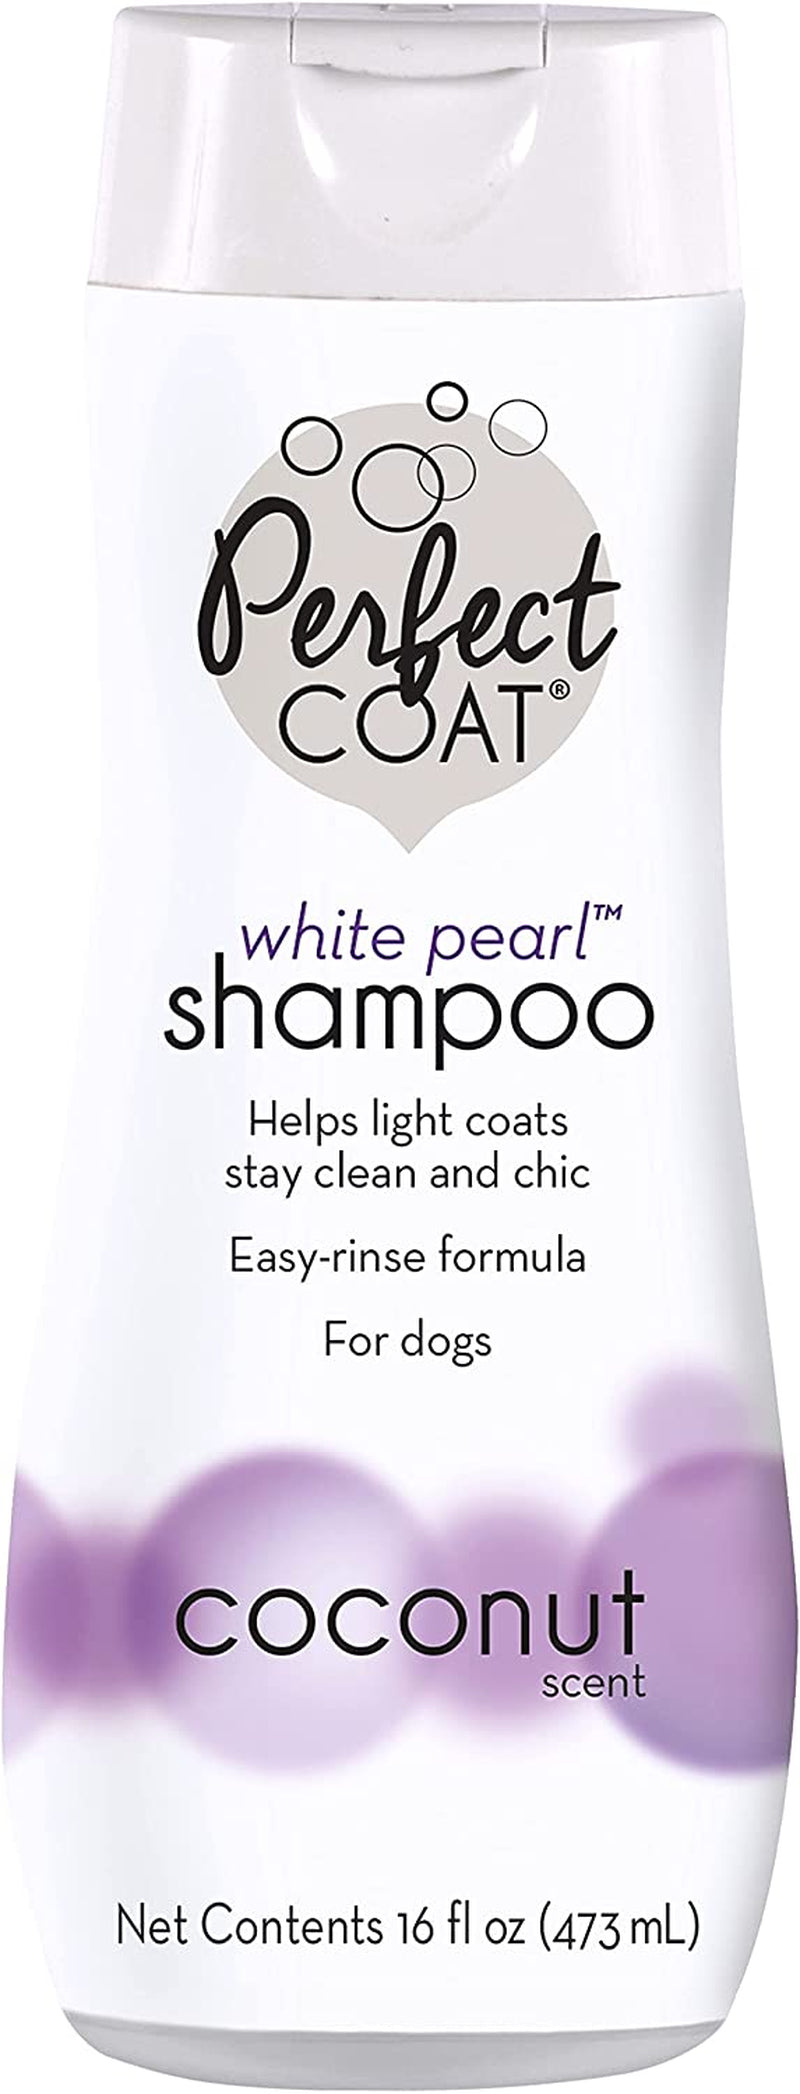 Perfect Coat White Pearl Shampoo with Shed Control